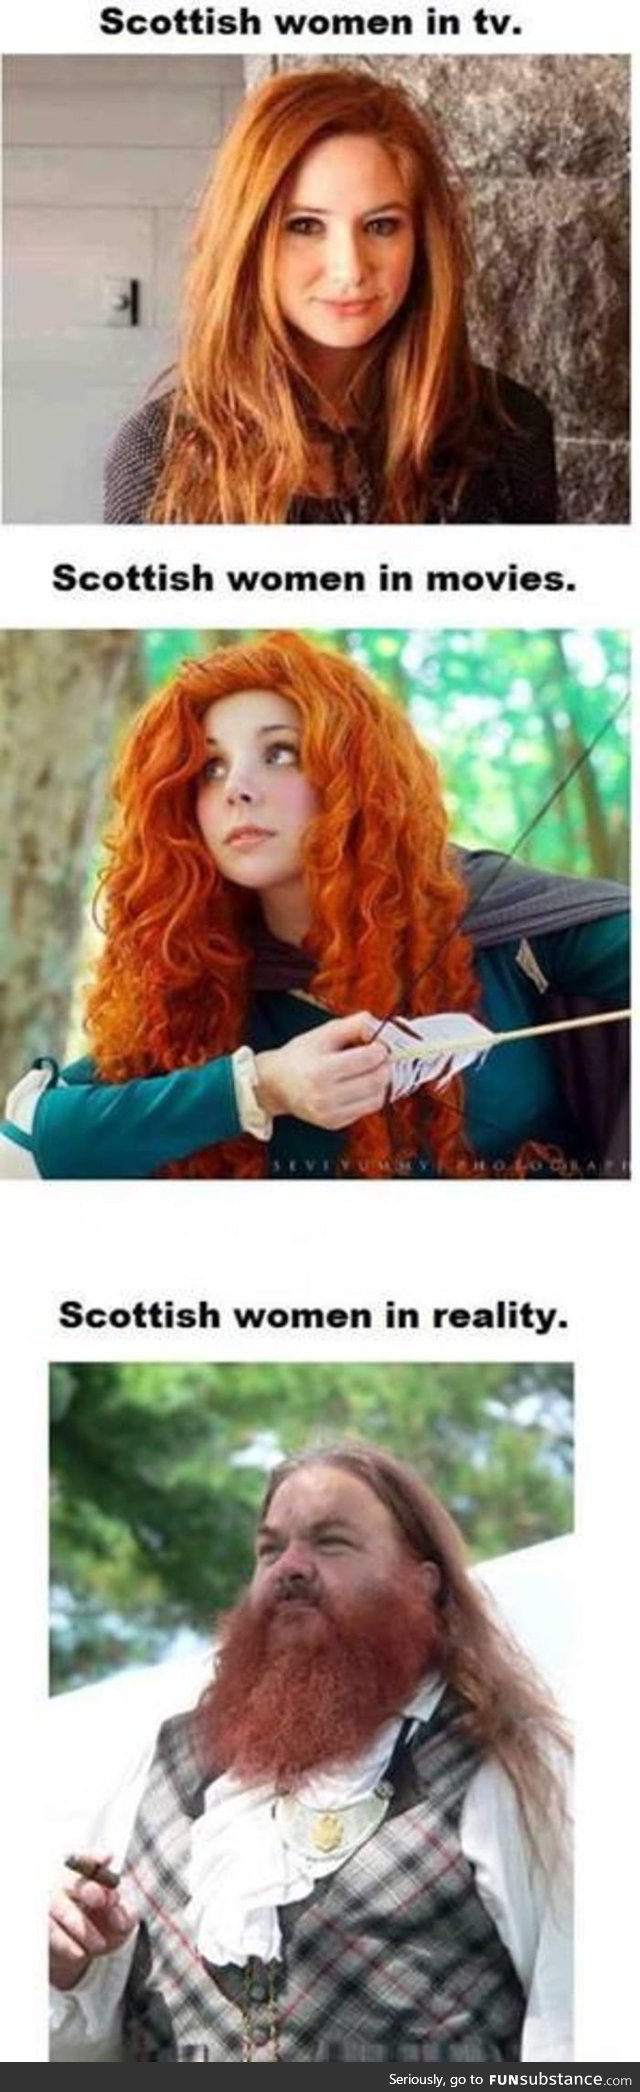 So Scots ARE irl dwarves after all. I knew it